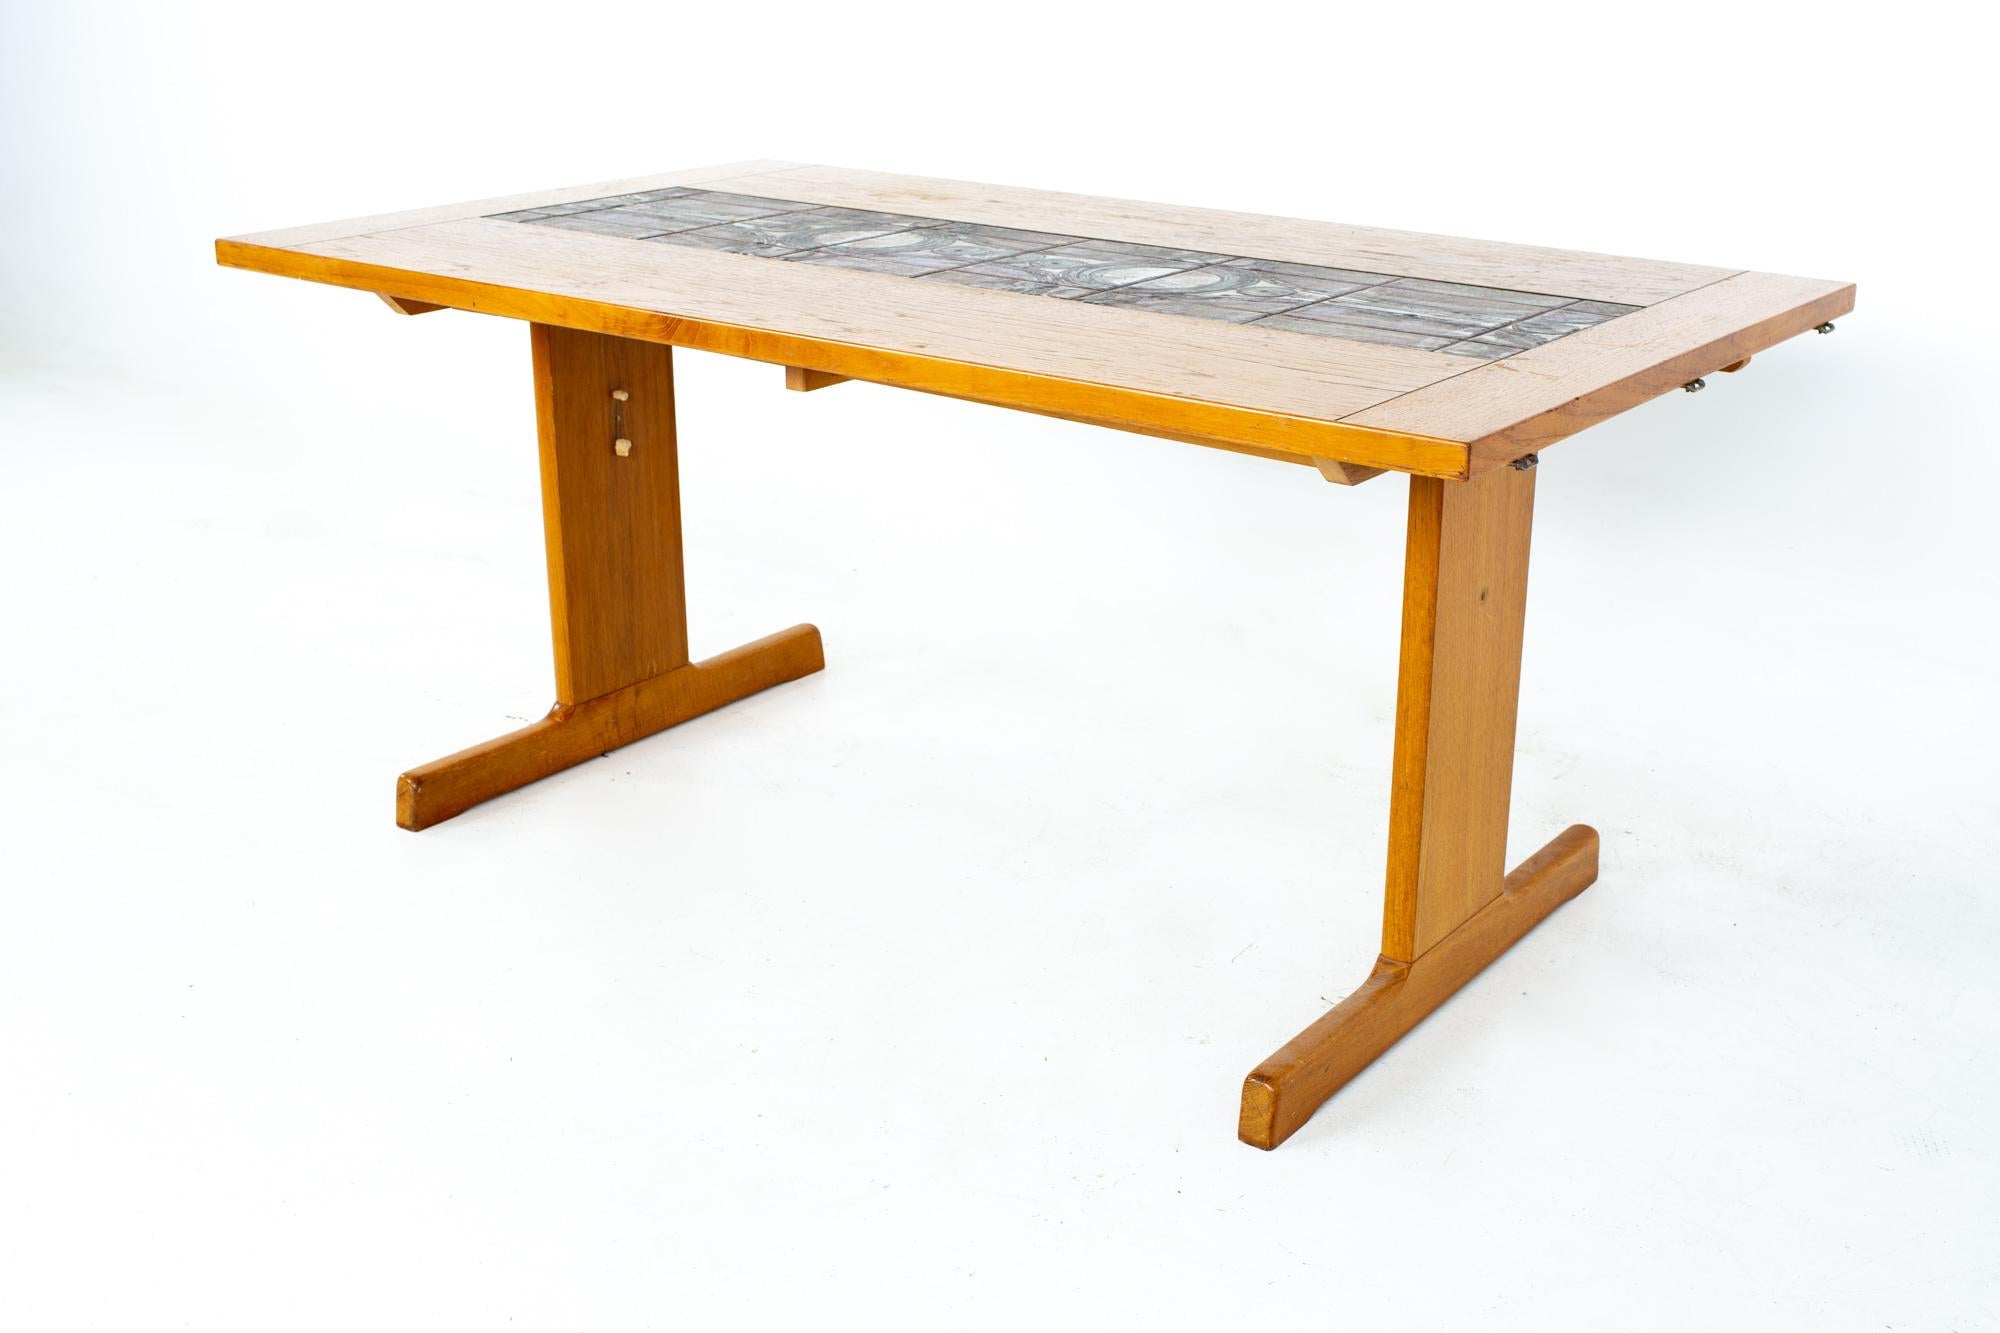 Gangso Mobler mid century teak tile top dropside dining table
Table measures: 62.5 wide x 36 deep x 28.5 inches high; each leaf is 18 inches wide, making maximum table width of 98.5 inches when both leaves are used 

All pieces of furniture can